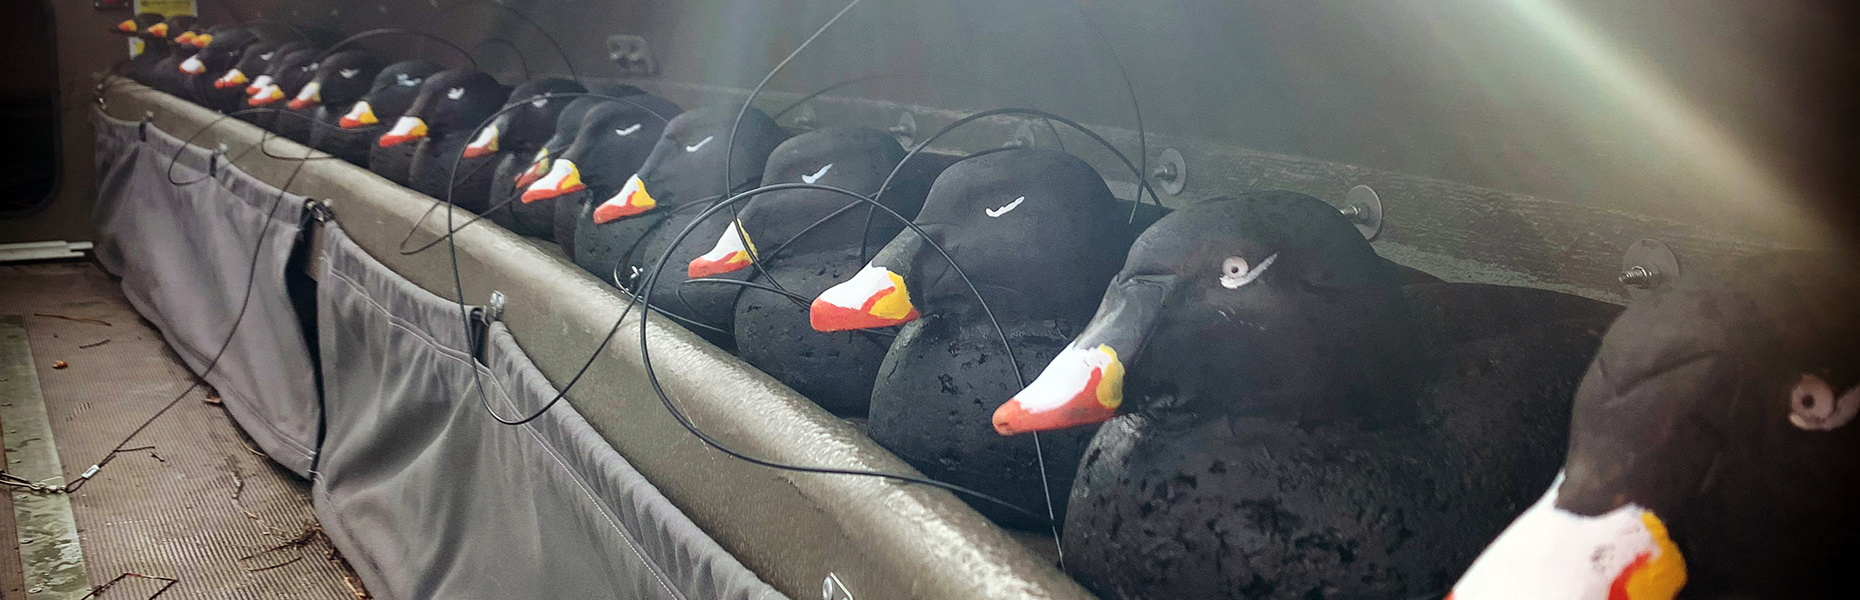 All our ducks lined up...